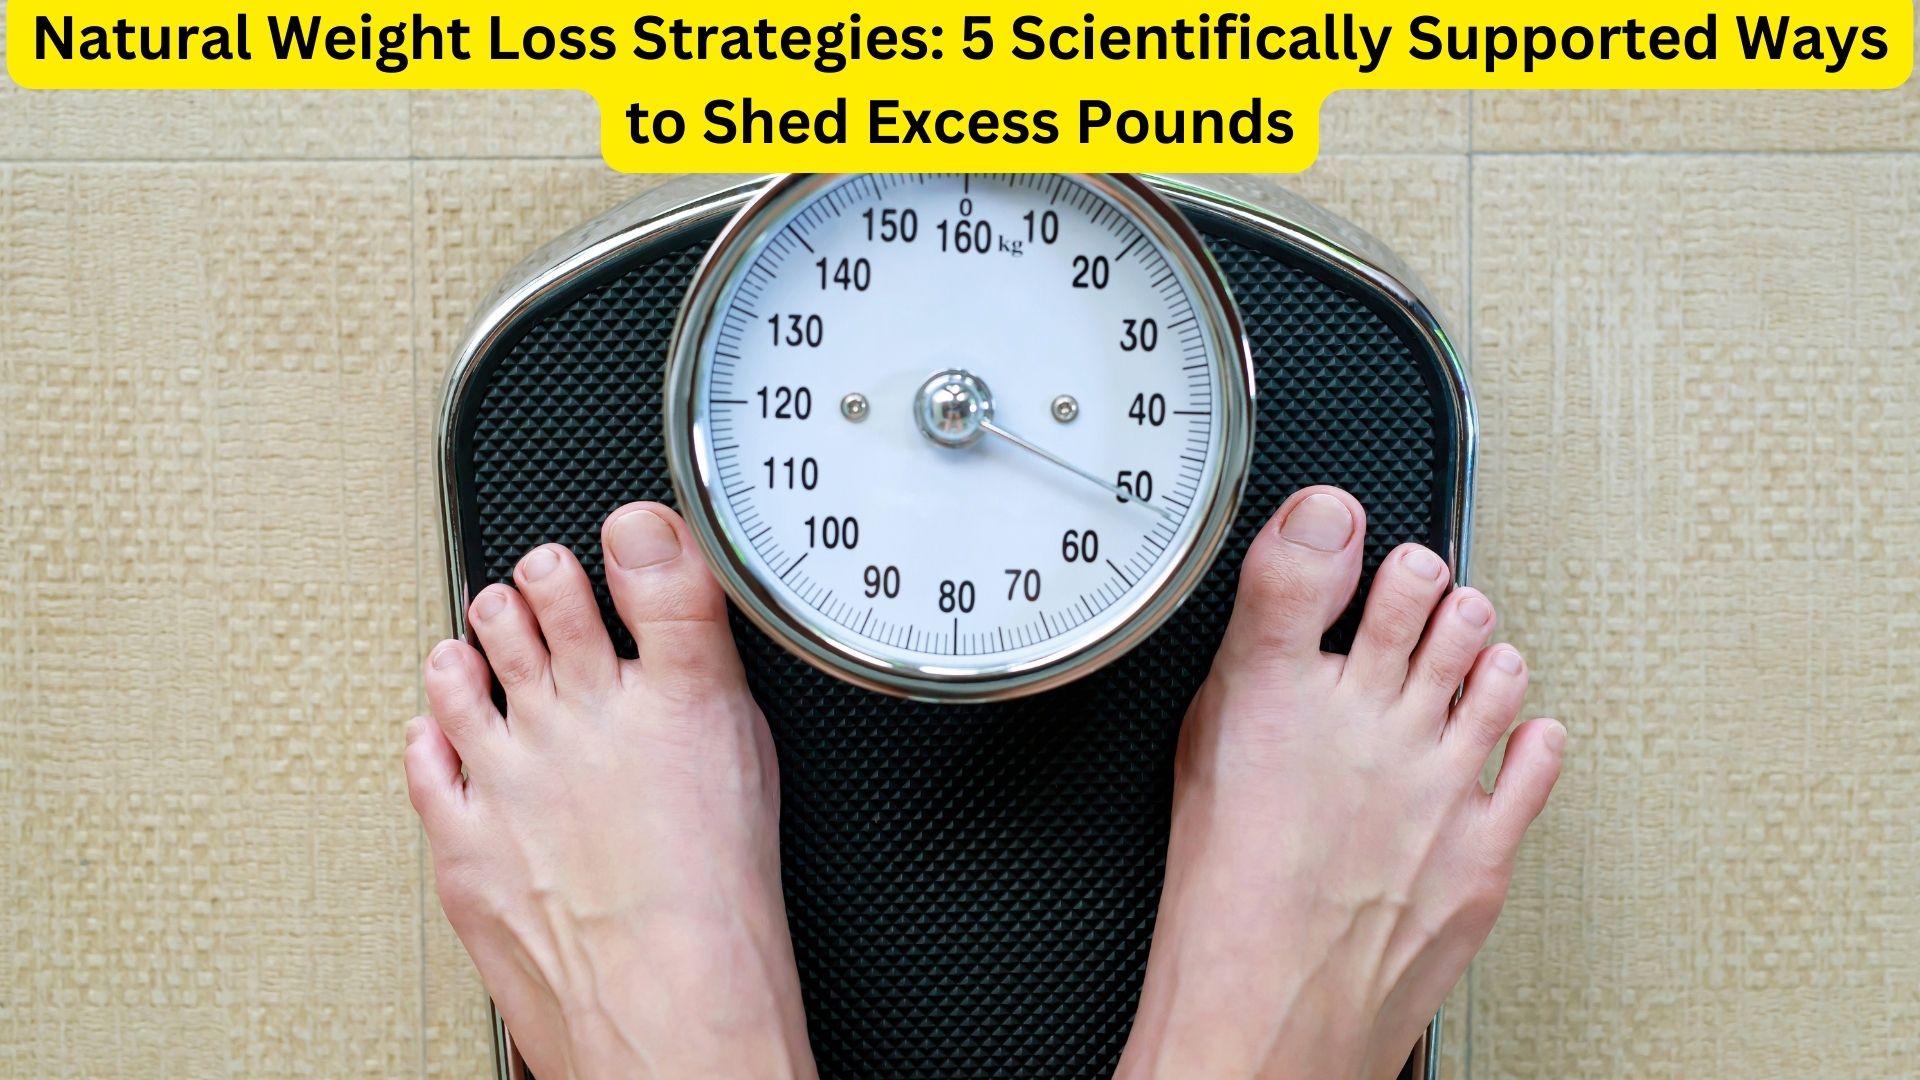 Natural Weight Loss Strategies: 5 Scientifically Supported Ways to Shed Excess Pounds